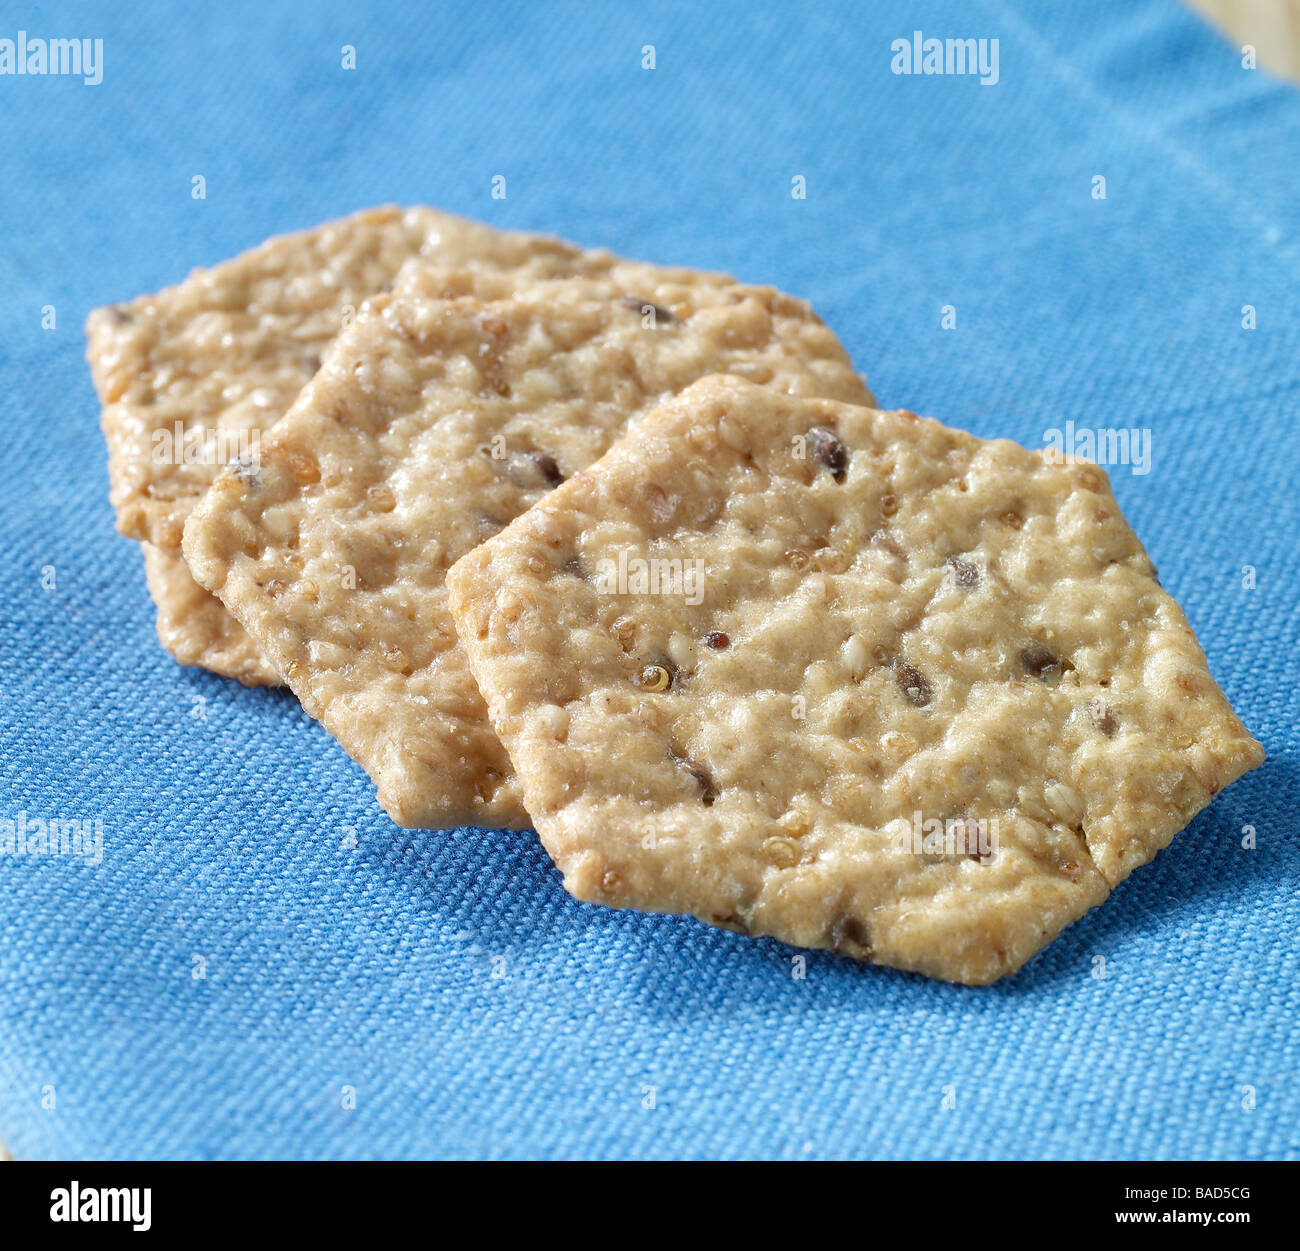 Multi grain crackers on a blue background Stock Photo